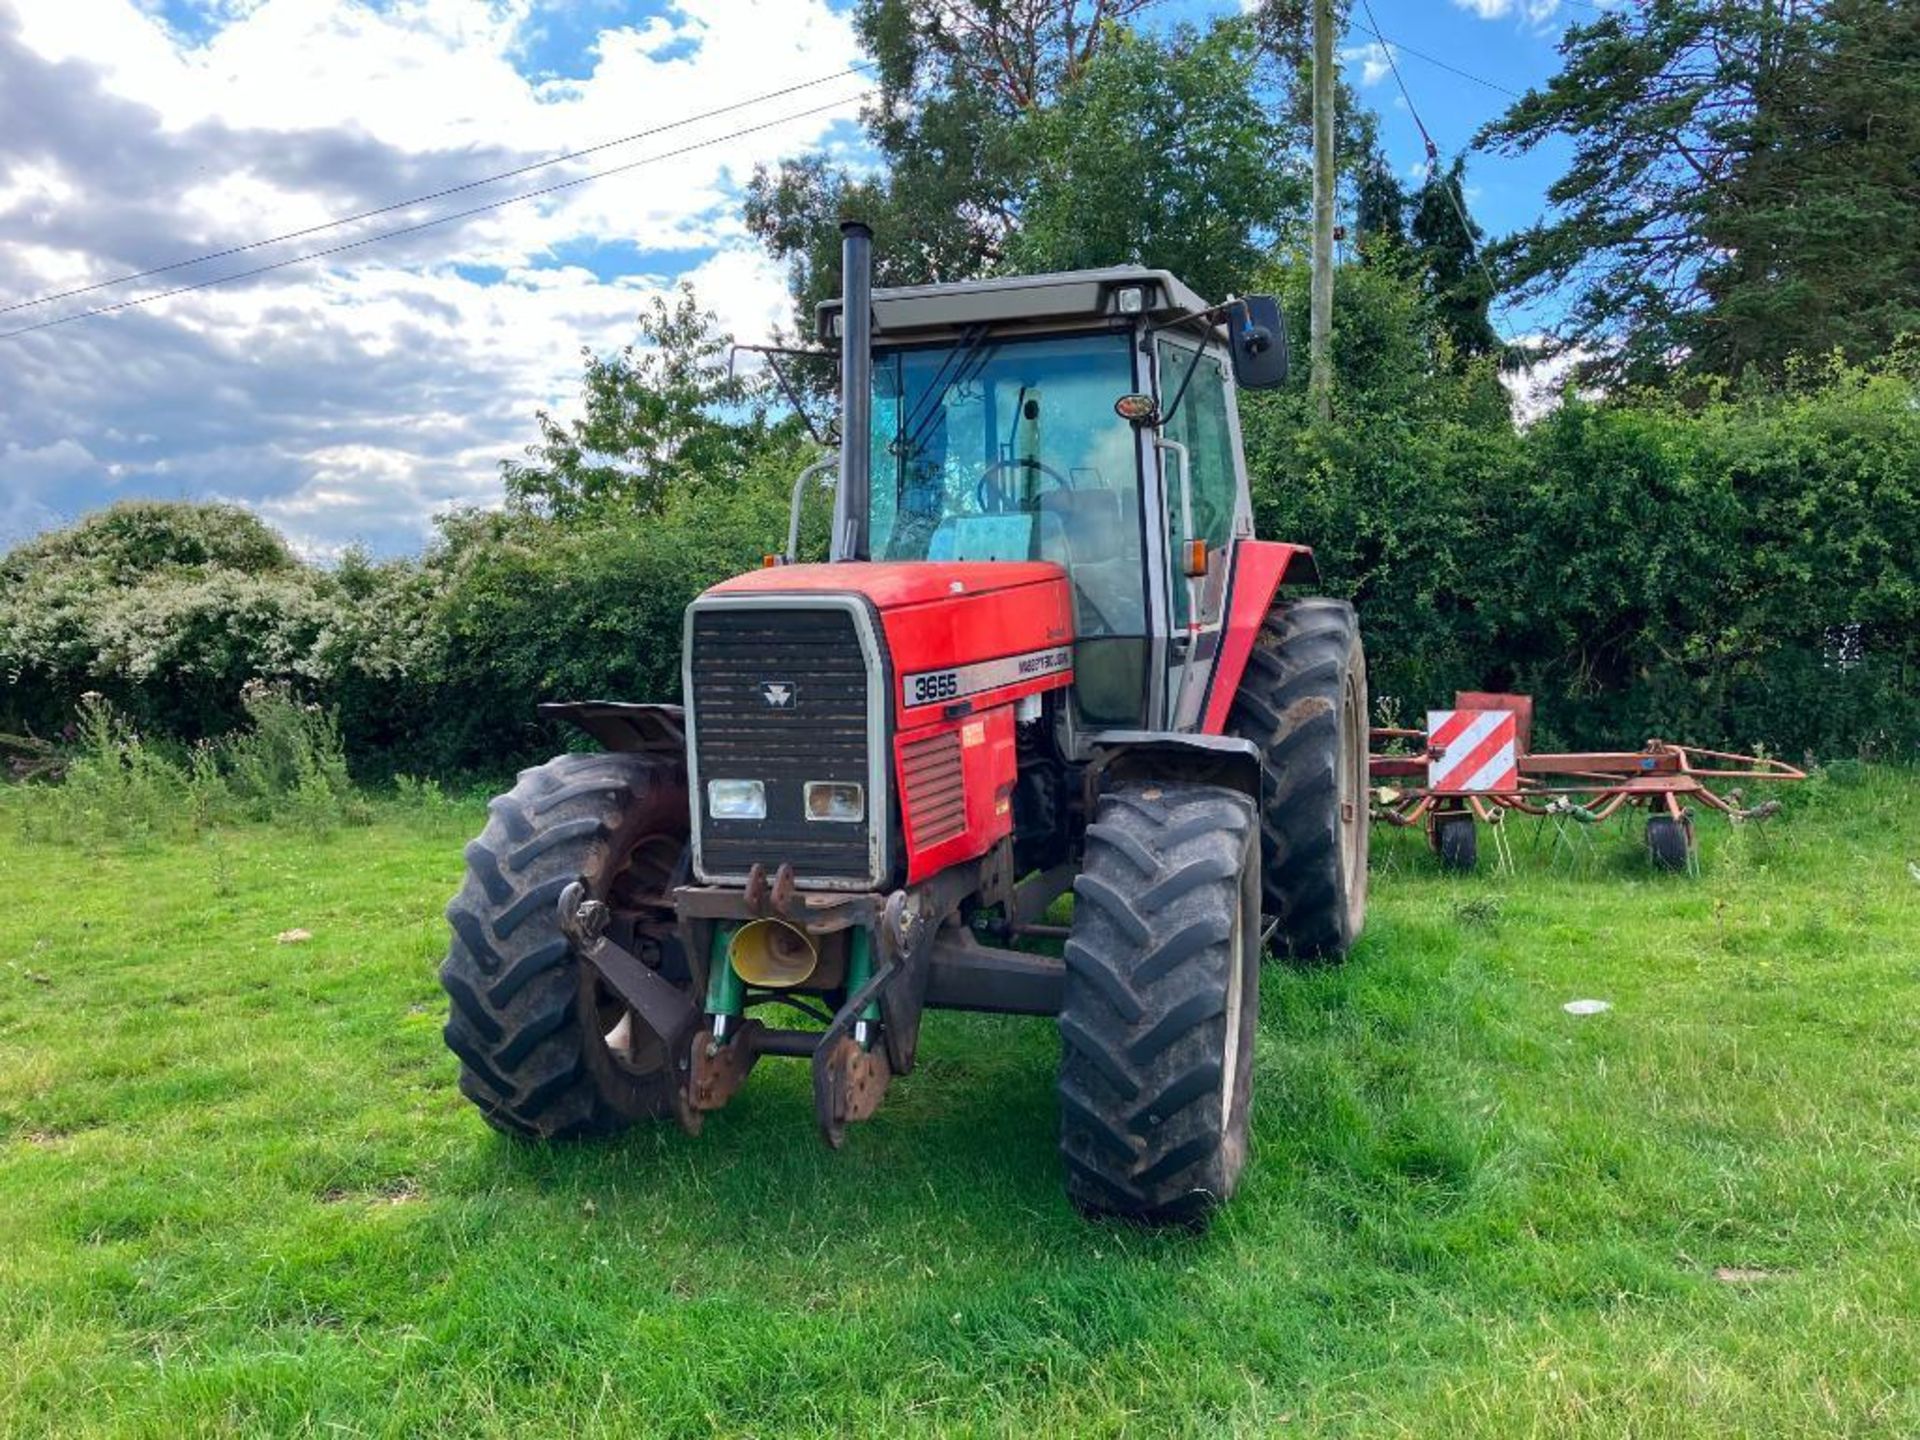 1995 Massey Ferguson 3655 Dynashift 4wd Datatronic tractor with 3 manual spools, front linkage and P - Image 14 of 23